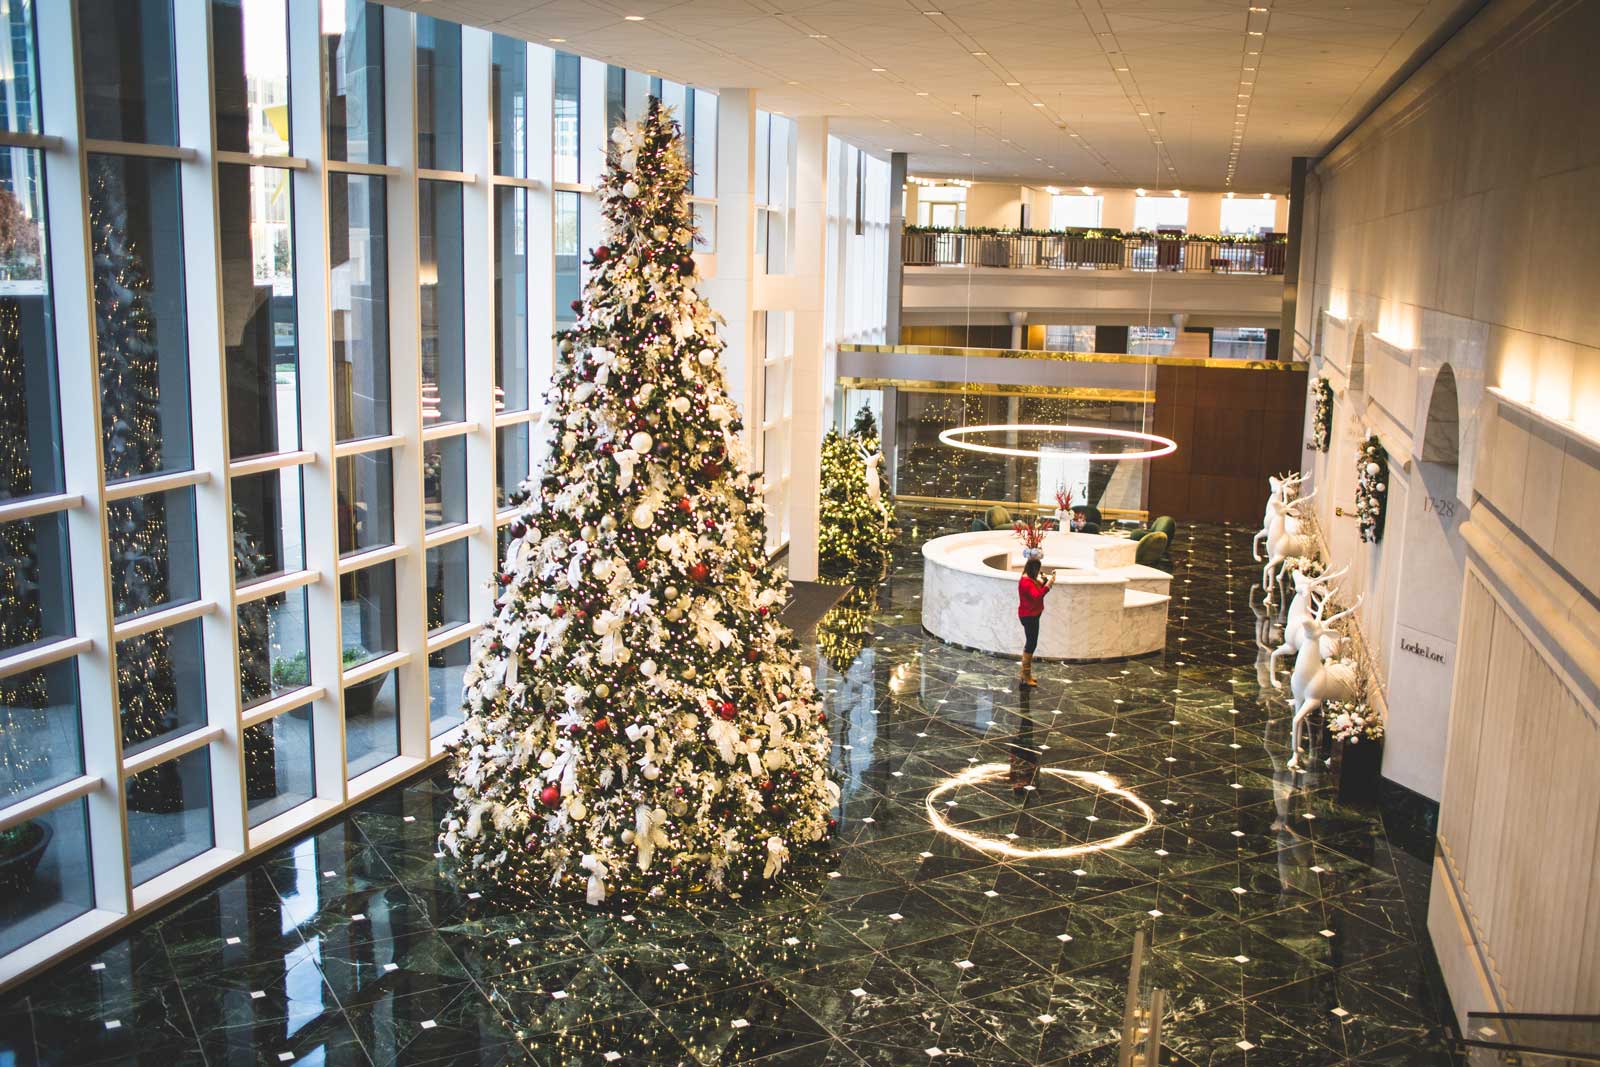 Office building with tower tree and other holiday decor